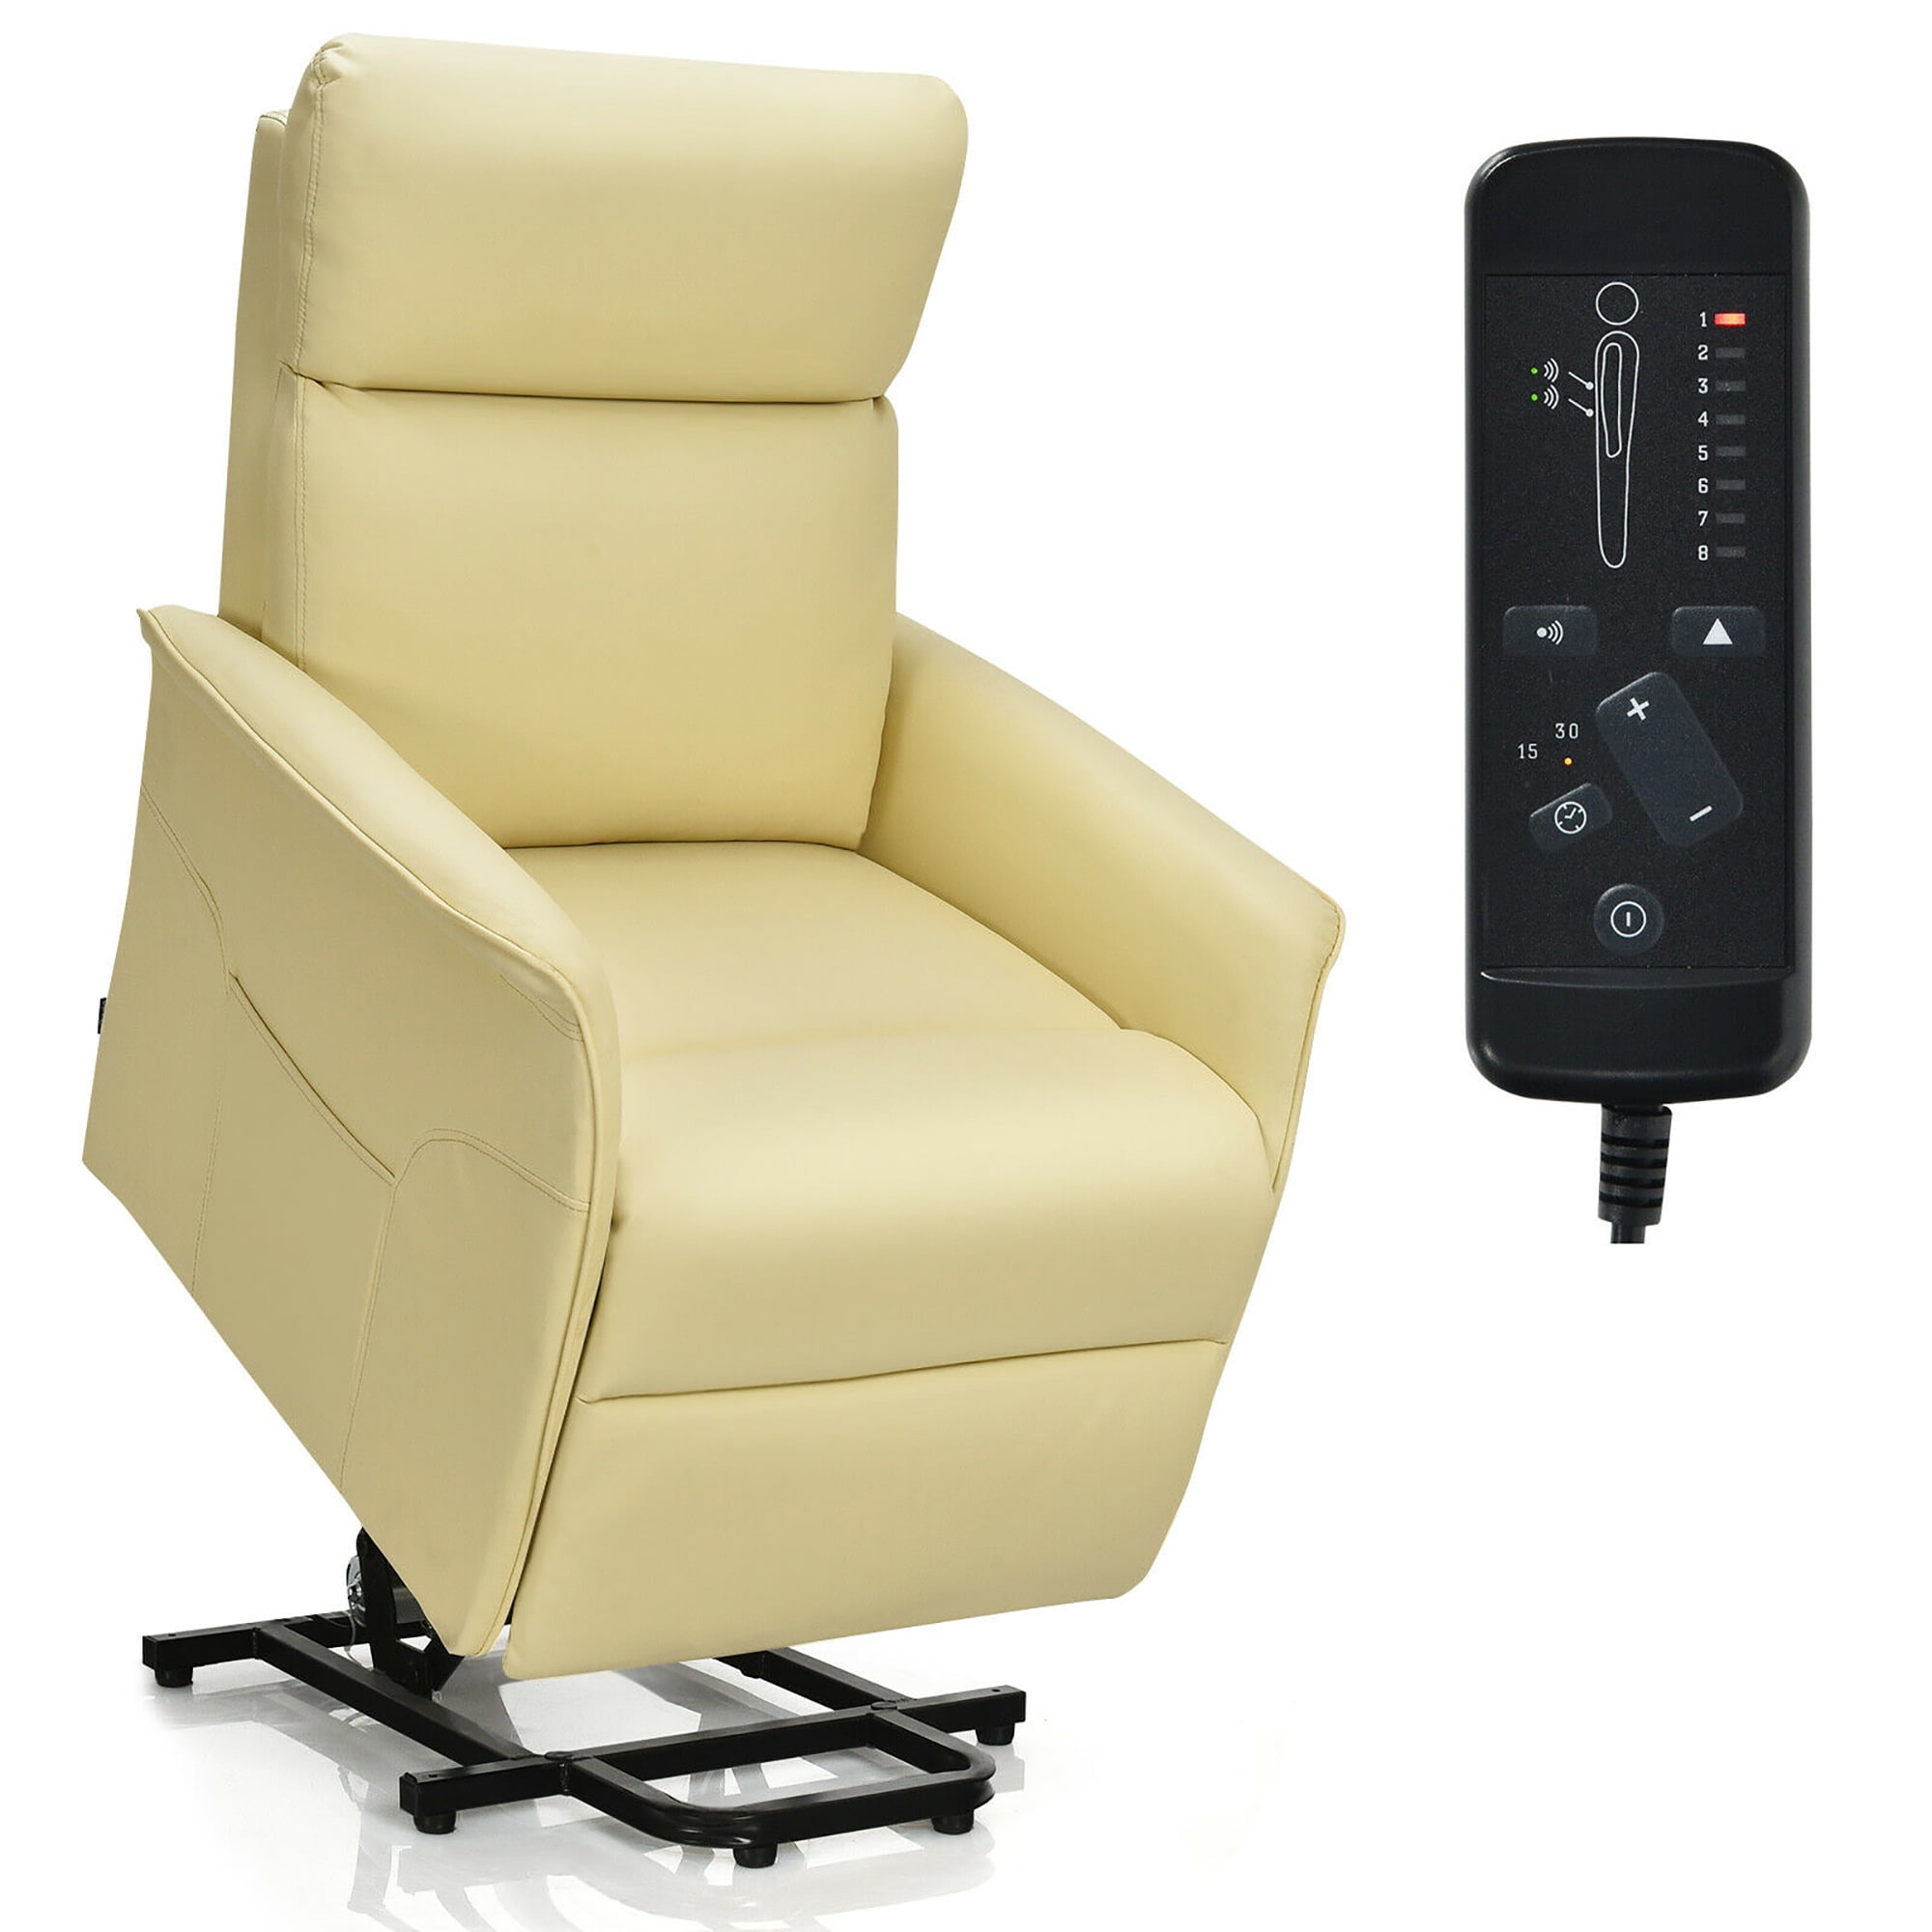 Heated Vibration Massage Sofa with USB Port Faux Leather for Living Room/Bedroom/Media Room Brown YOURLITE Electric Power Lift Recliner Chair Wireless Remote Control Massage Sofa for Senior Elderly